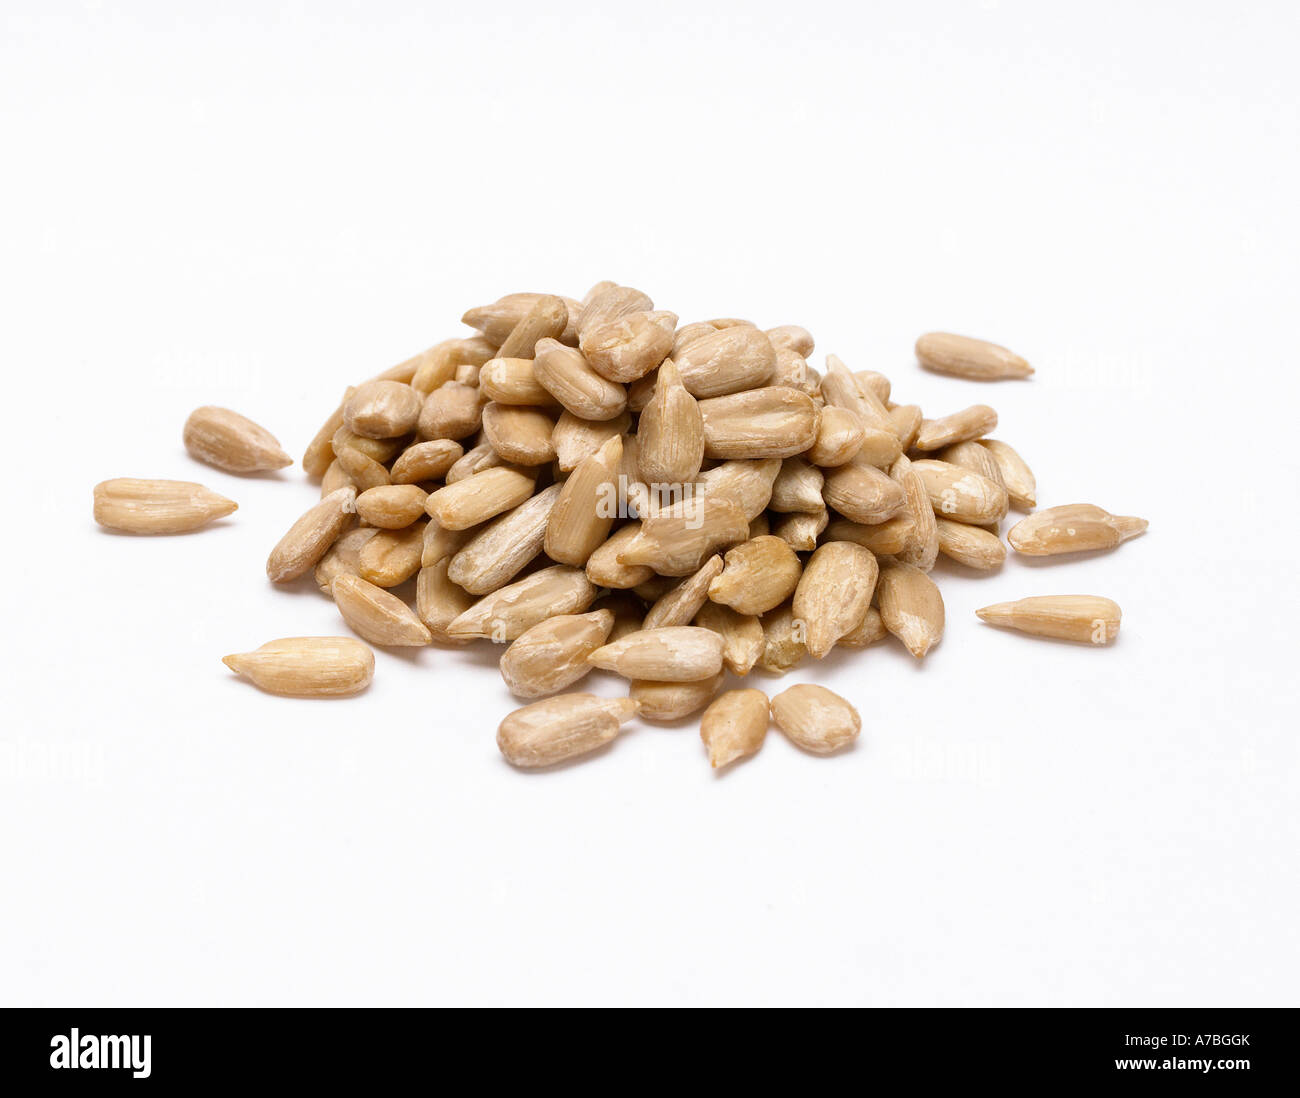 PILE OF SUNFLOWER SEEDS ON WHITE BACKGROUND Stock Photo